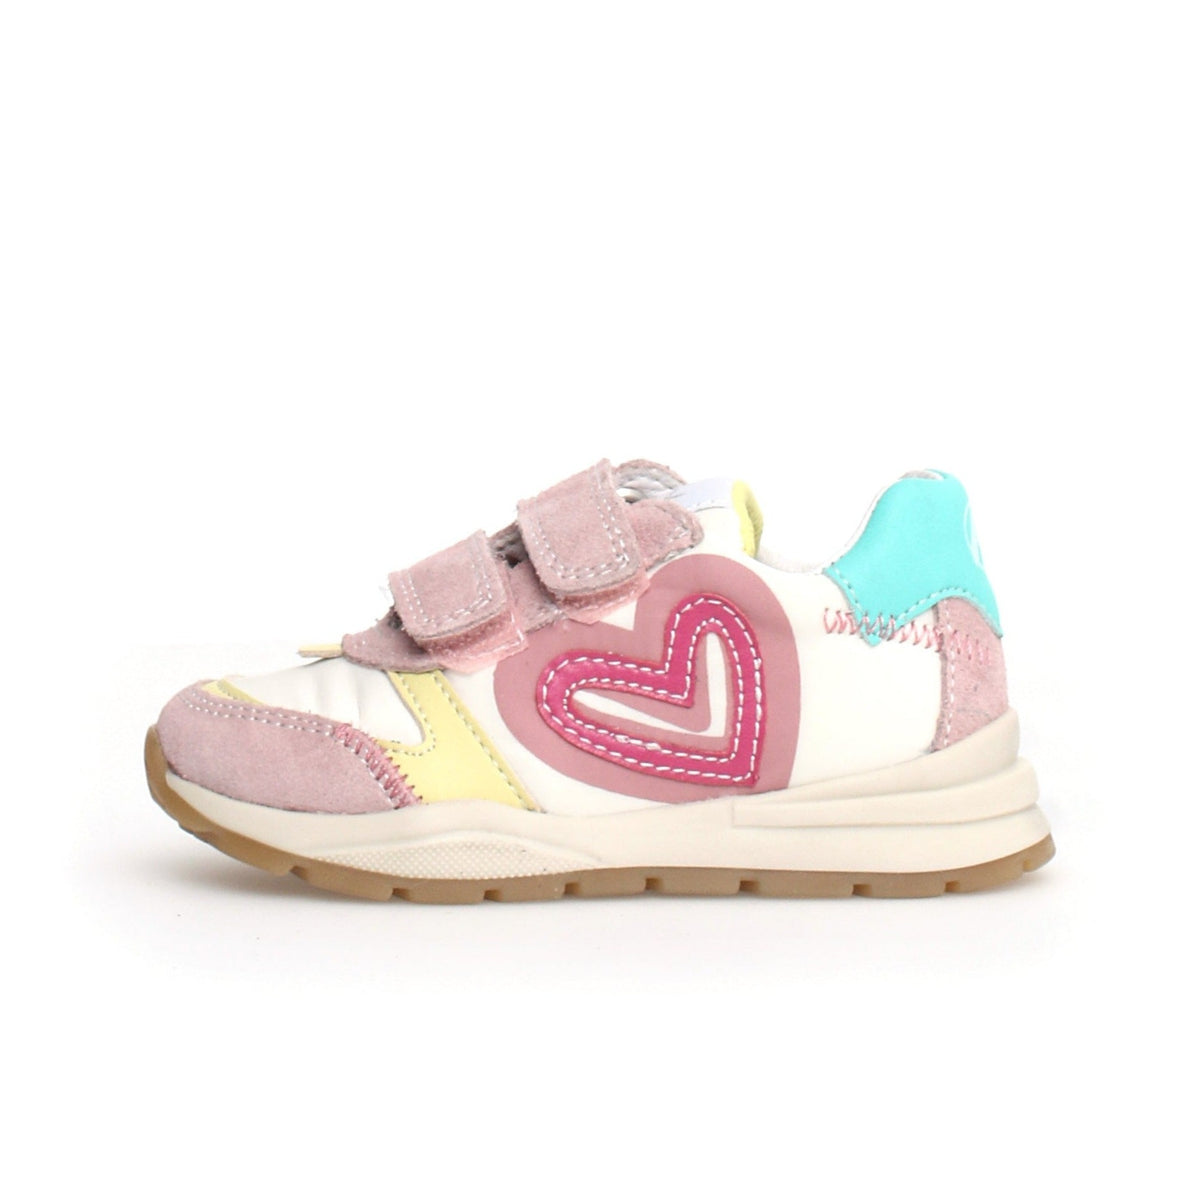 Sneakers Quelly Suede/Ny Pink-Milk